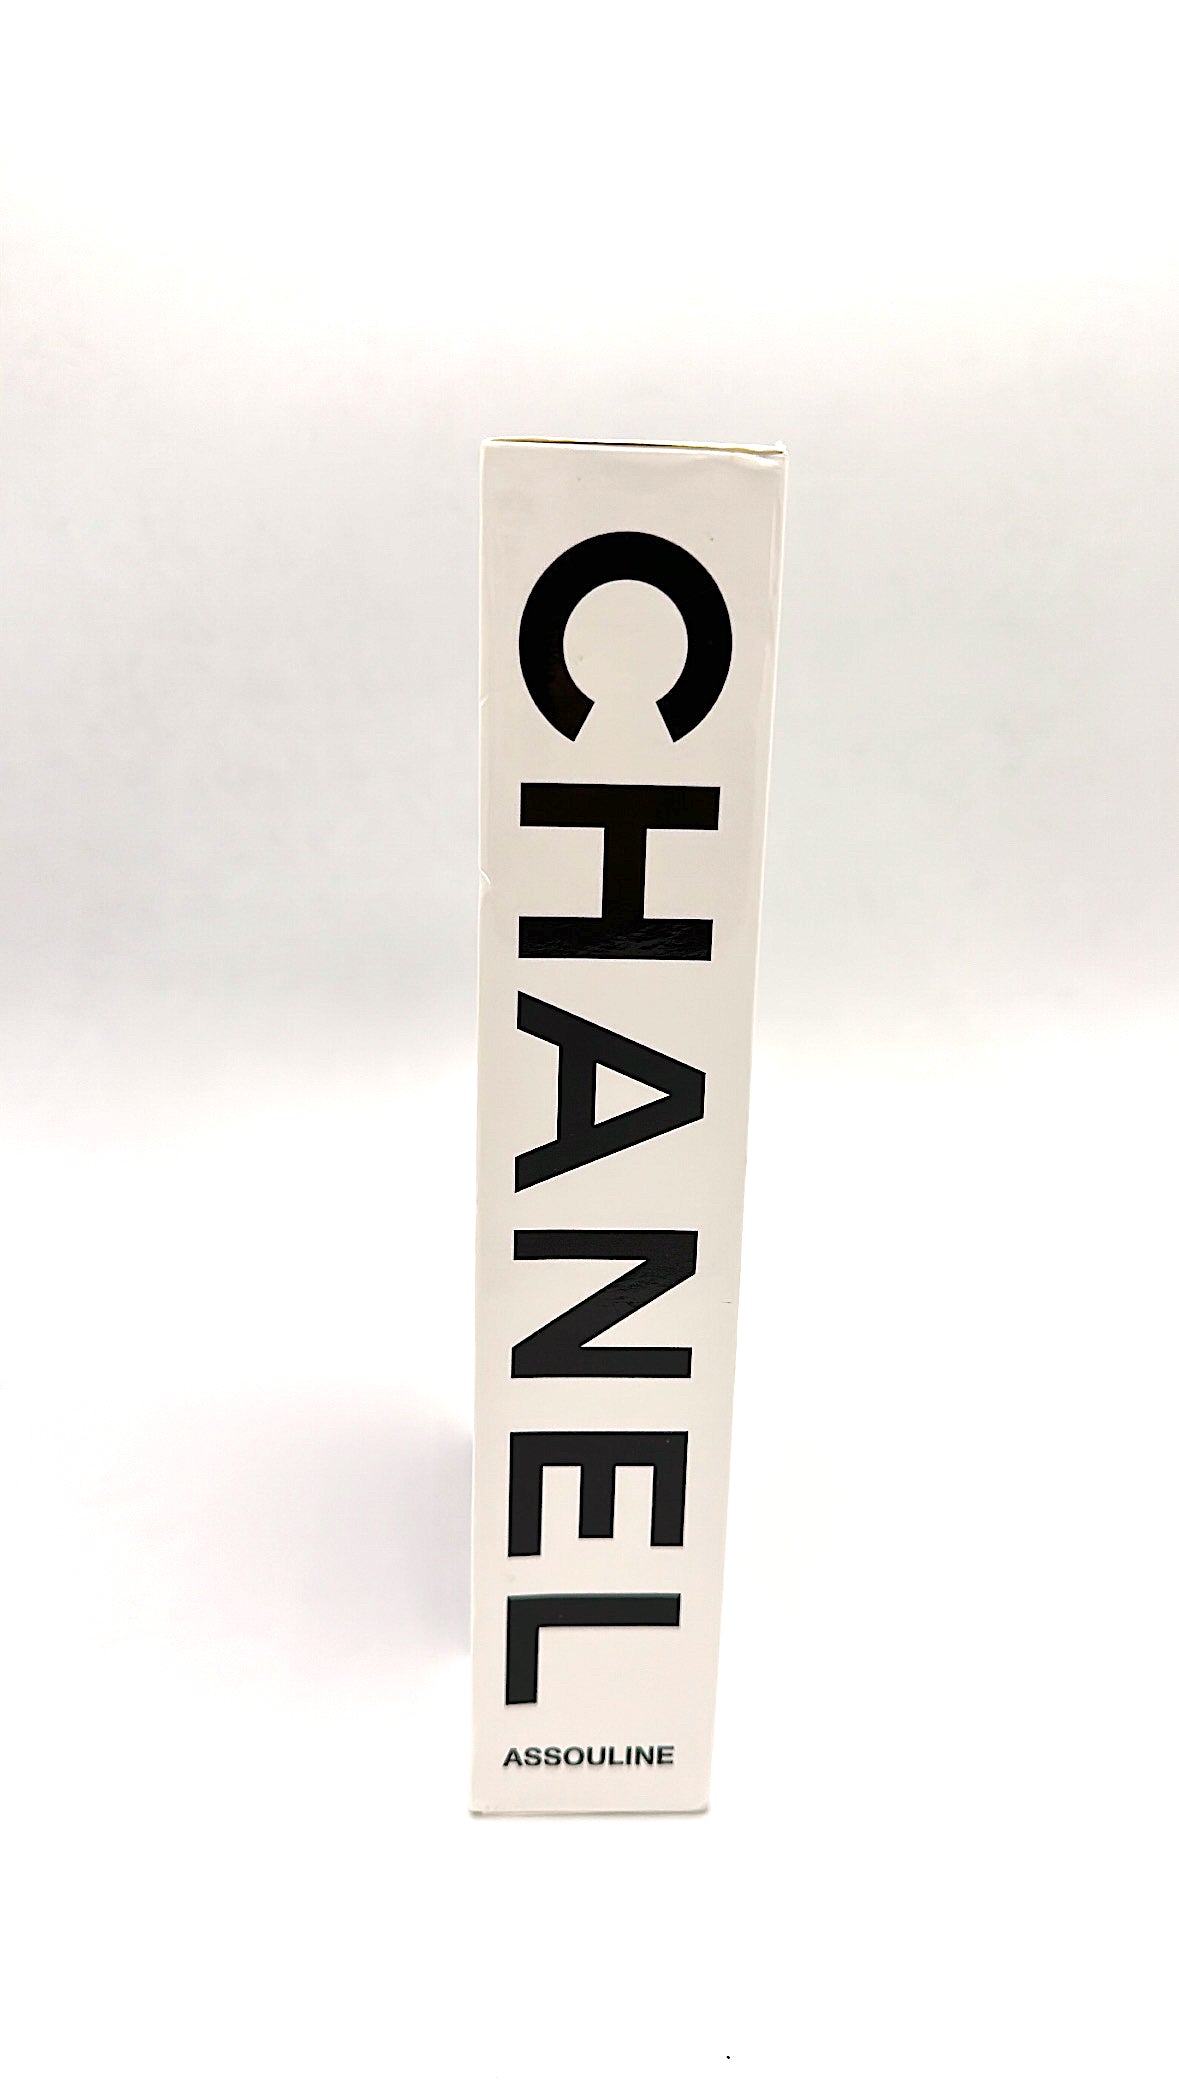 DIY CHANEL Book Cover 